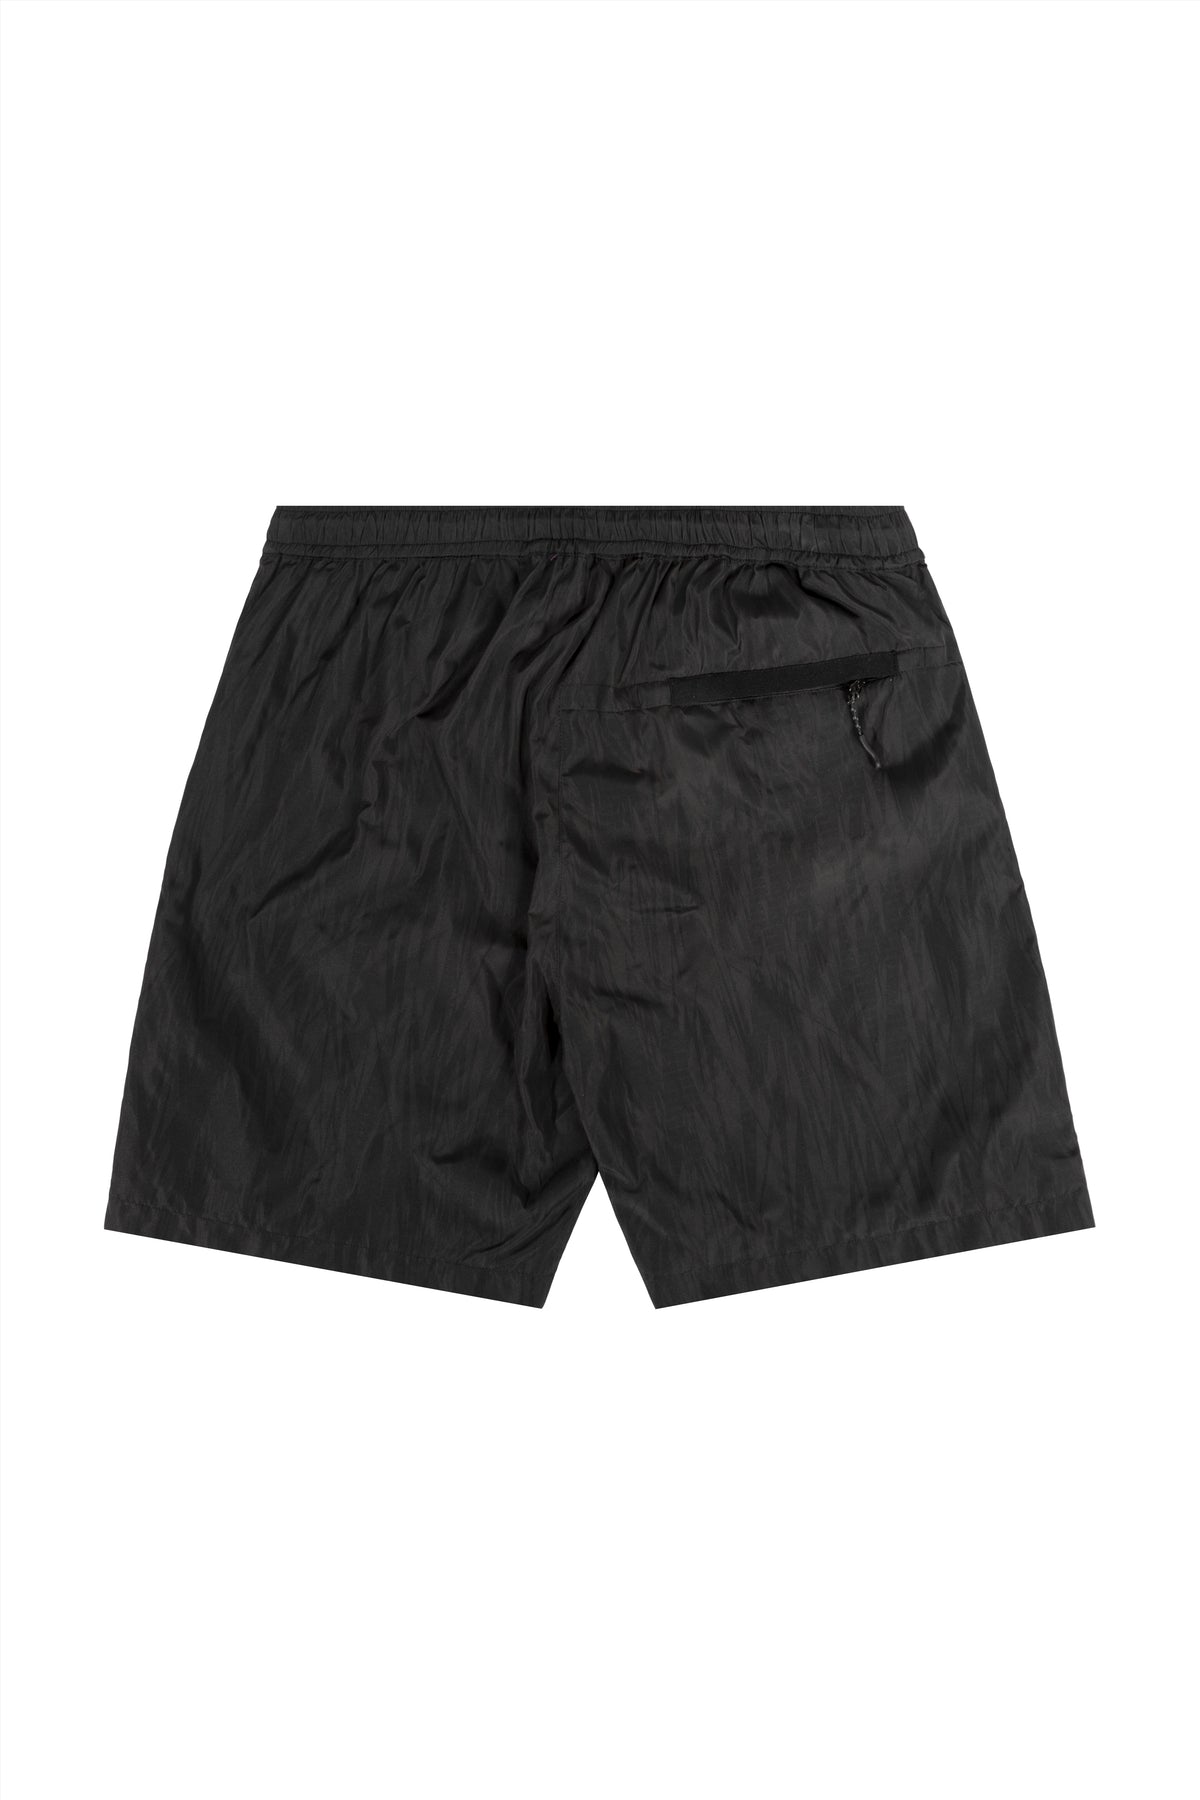 The Hundreds jags packable shorts black